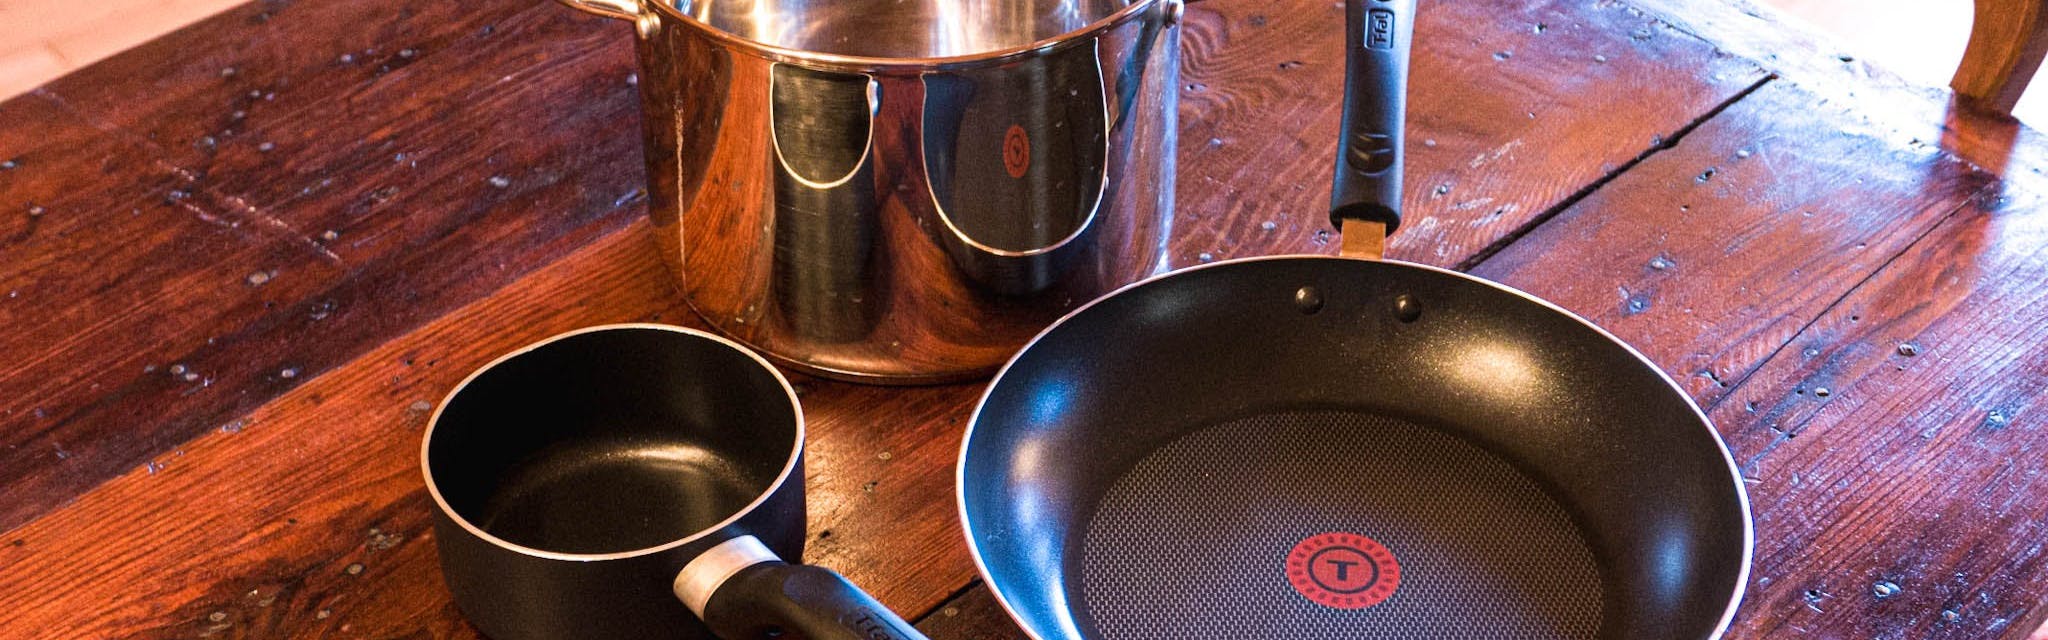 Made In vs. Caraway Cookware (11 Key Differences) - Prudent Reviews